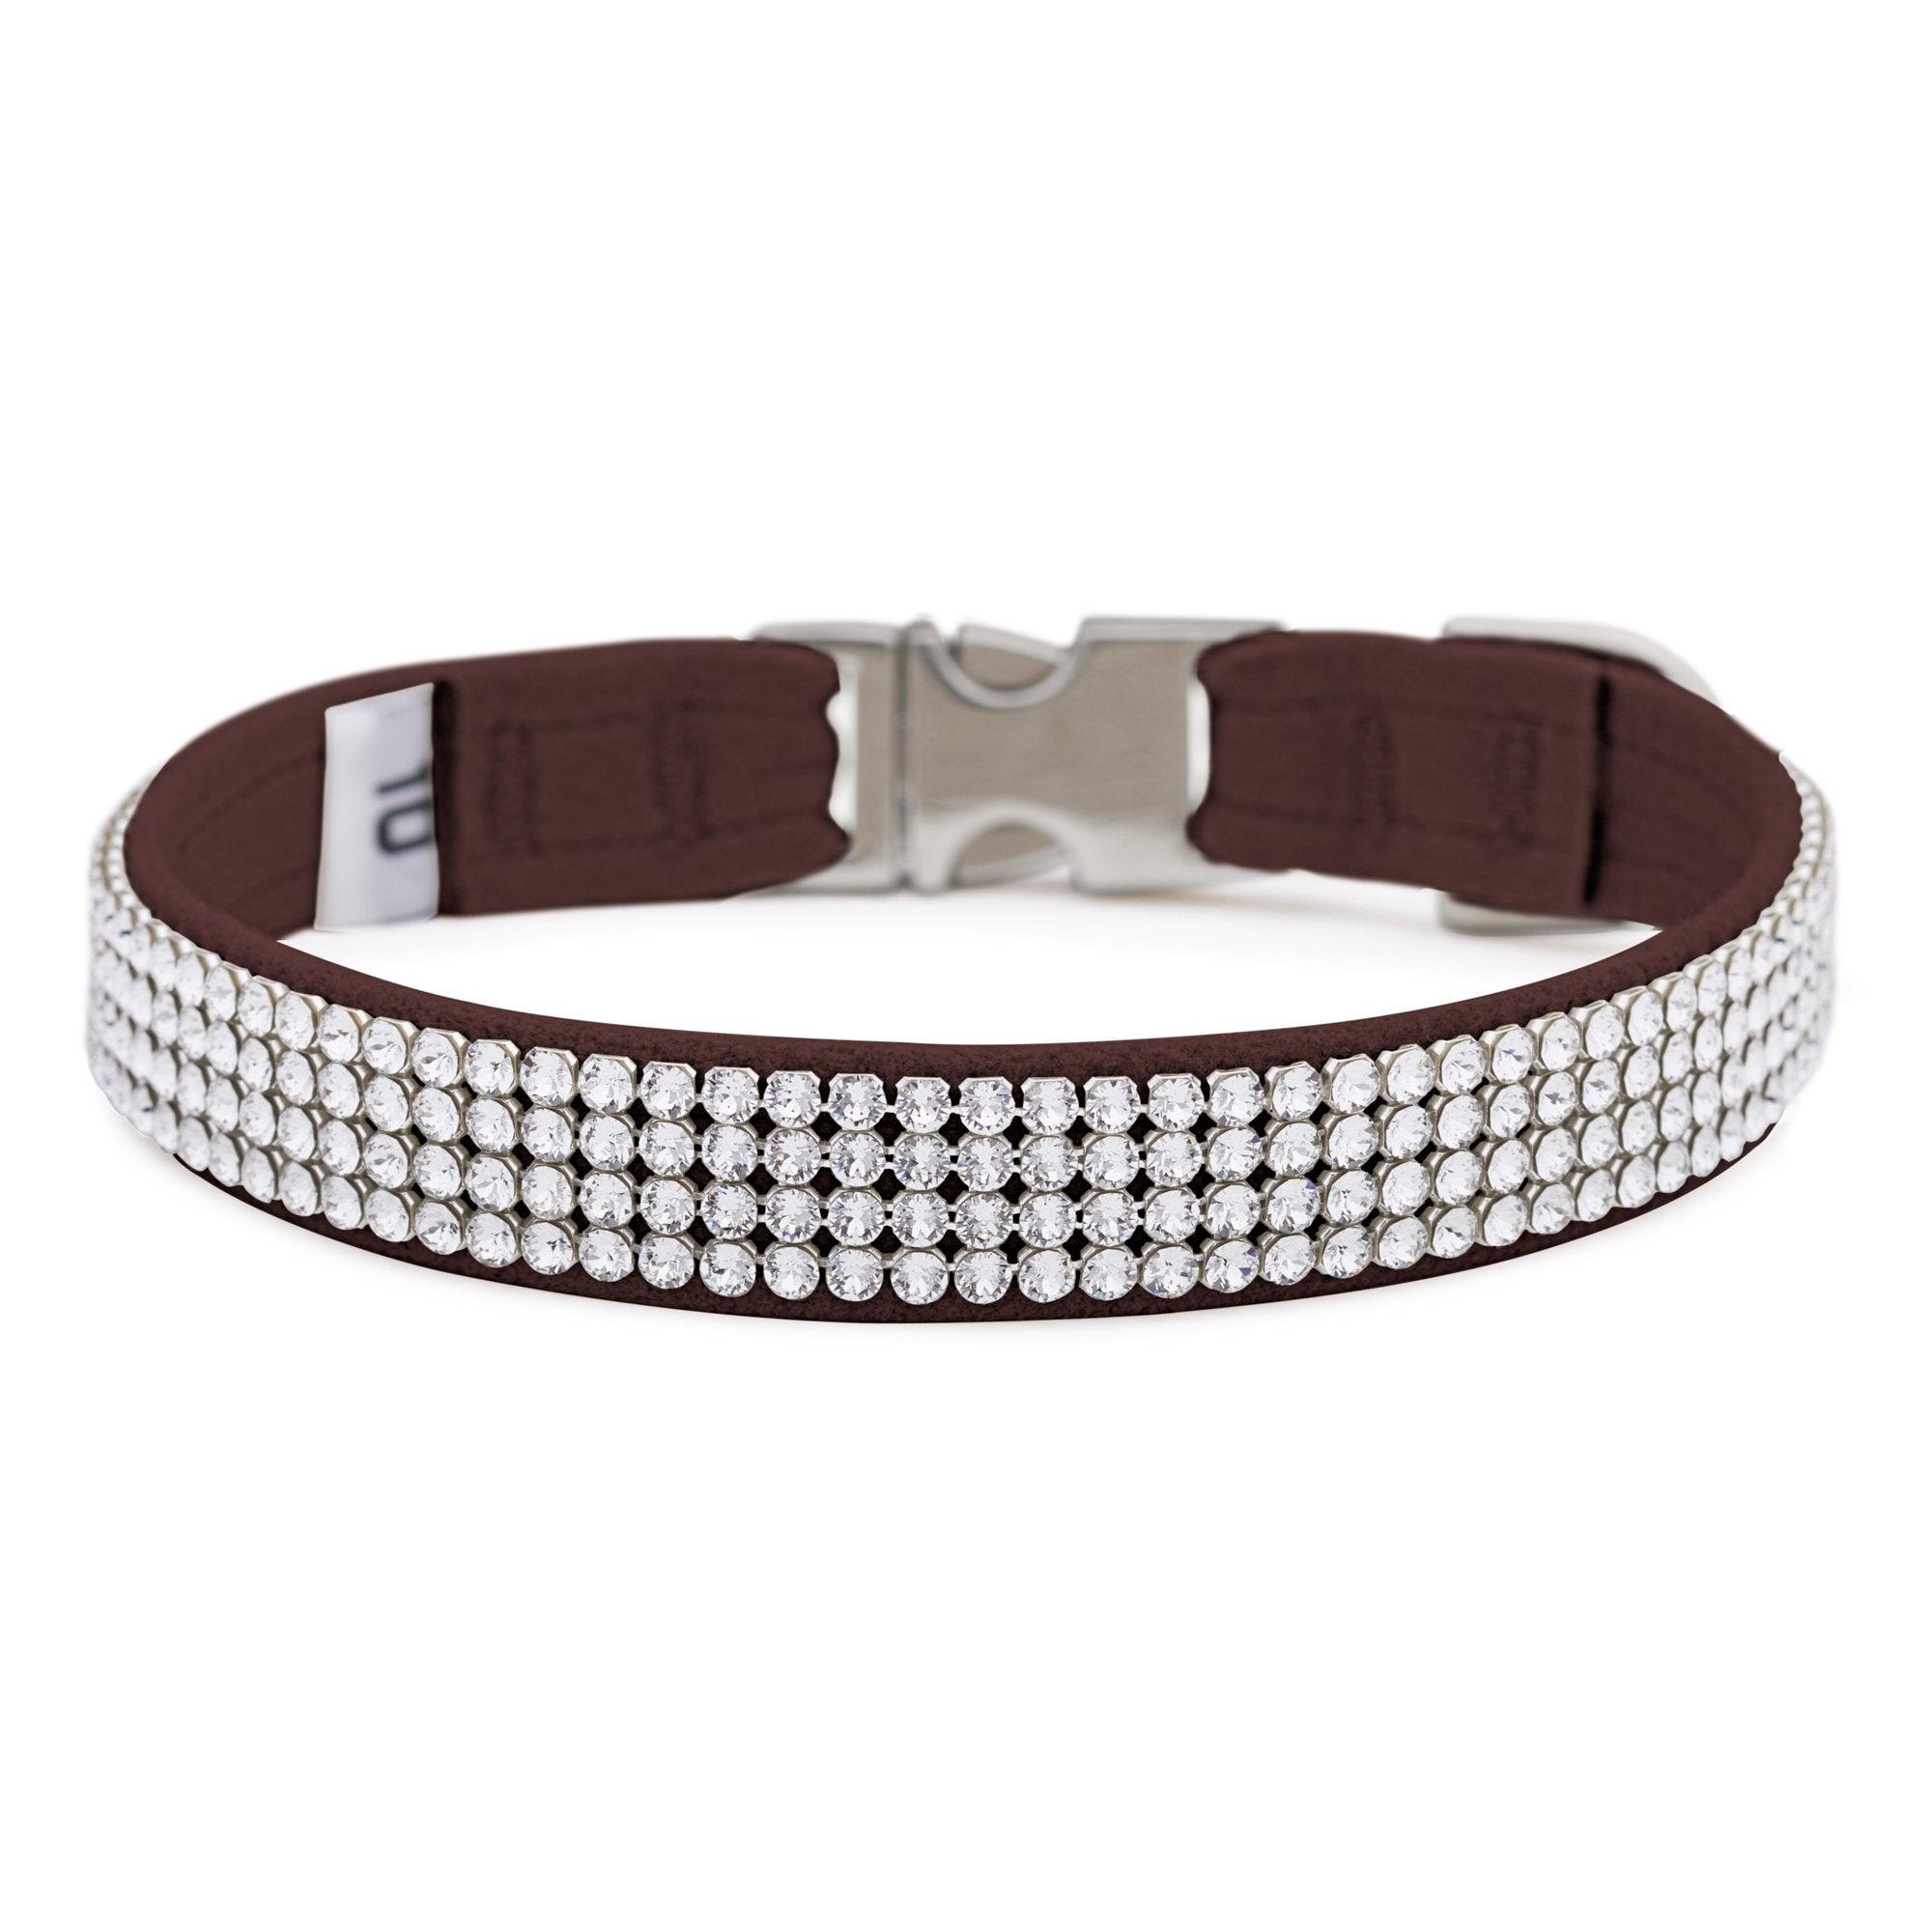 Chocolate 4 Row Giltmore Perfect Fit Collar - Rocky & Maggie's Pet Boutique and Salon